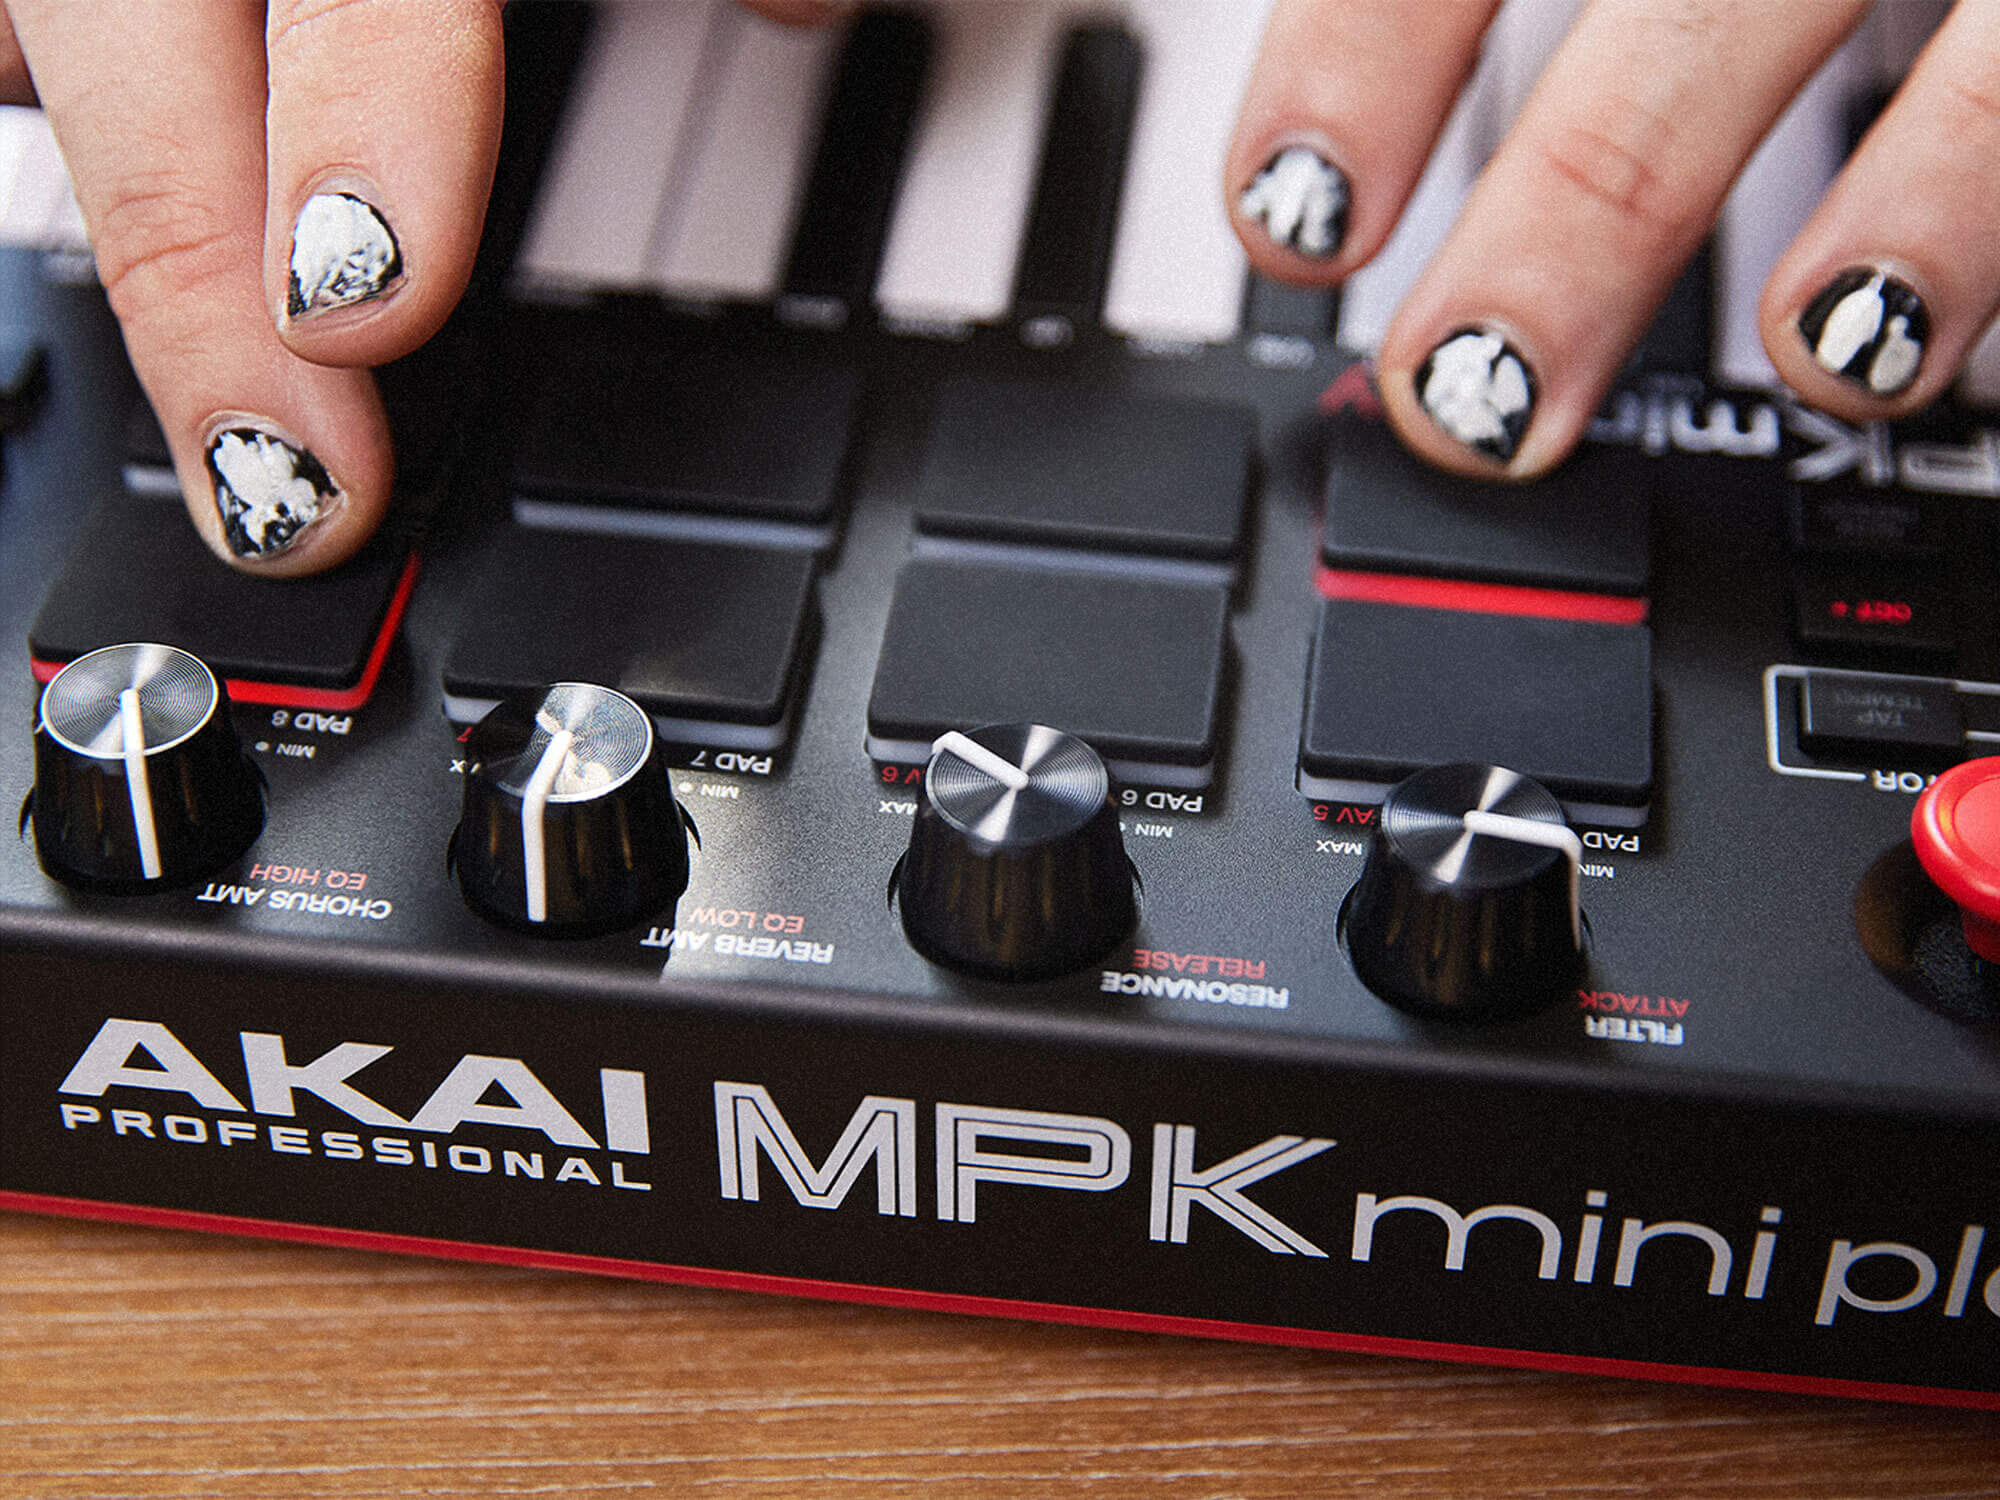 Akai MPK Mini Play MK3 review: flexible and portable with passable onboard  sounds | MusicTech